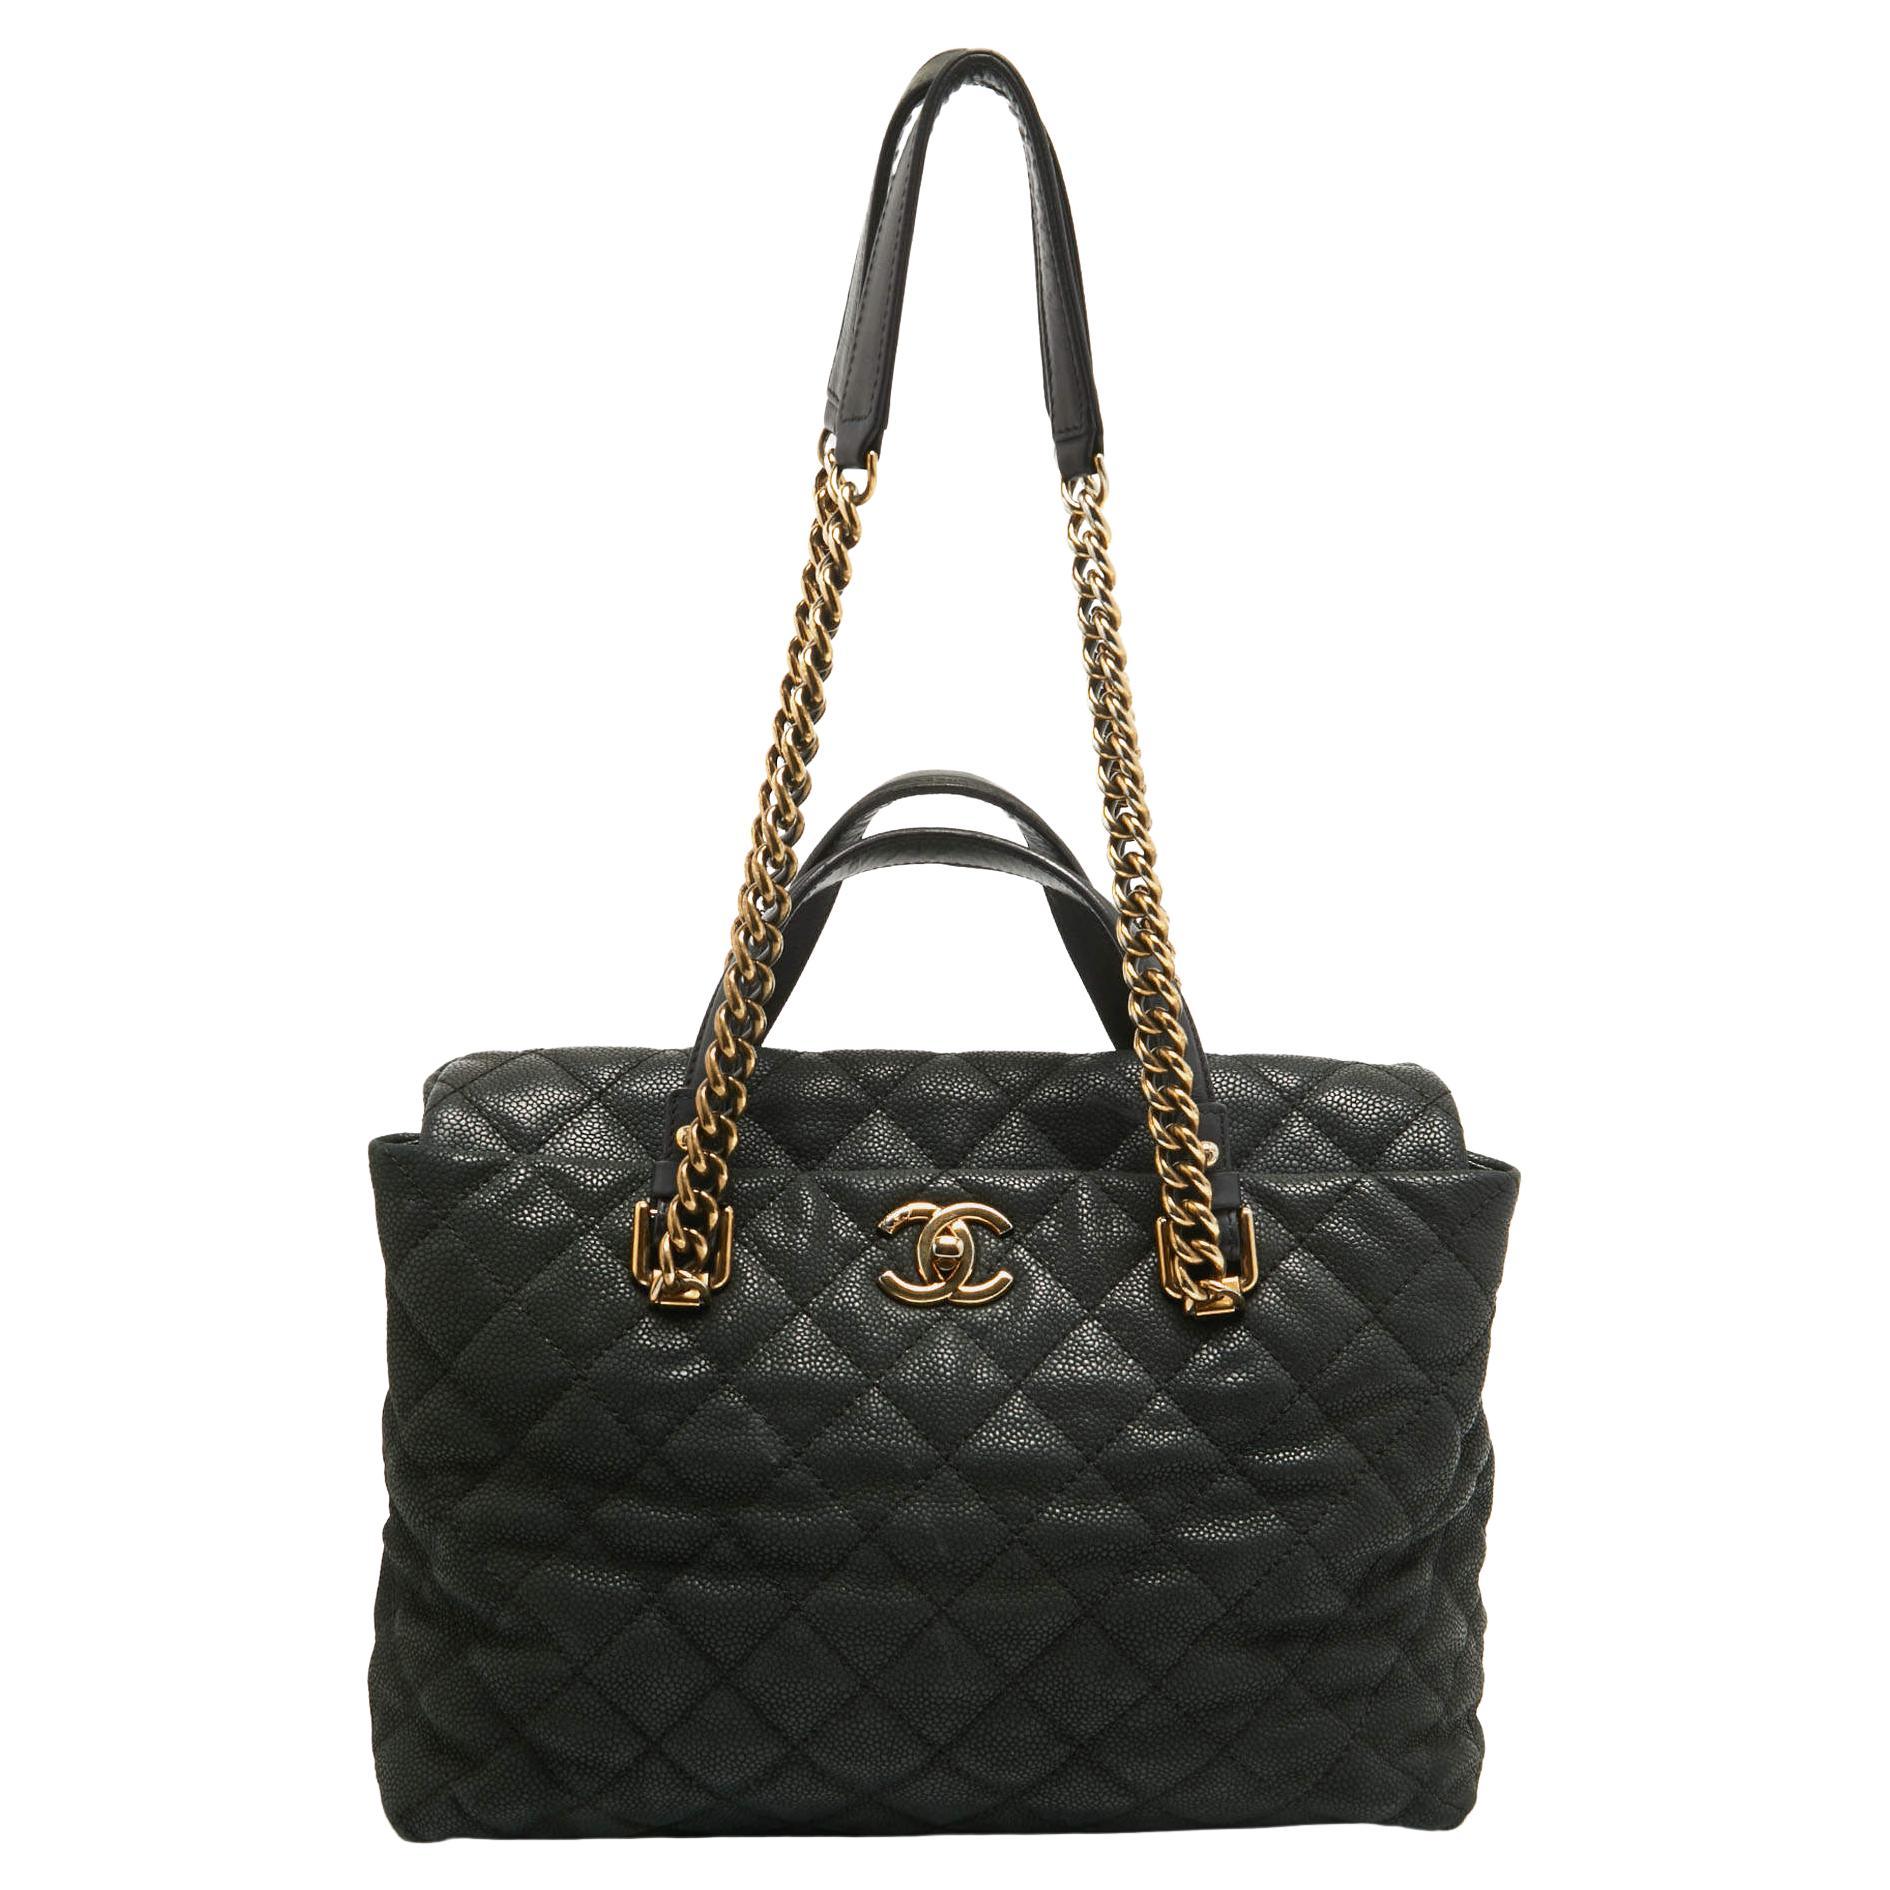 Chanel Black Caviar Leather Chic Quilt Tote